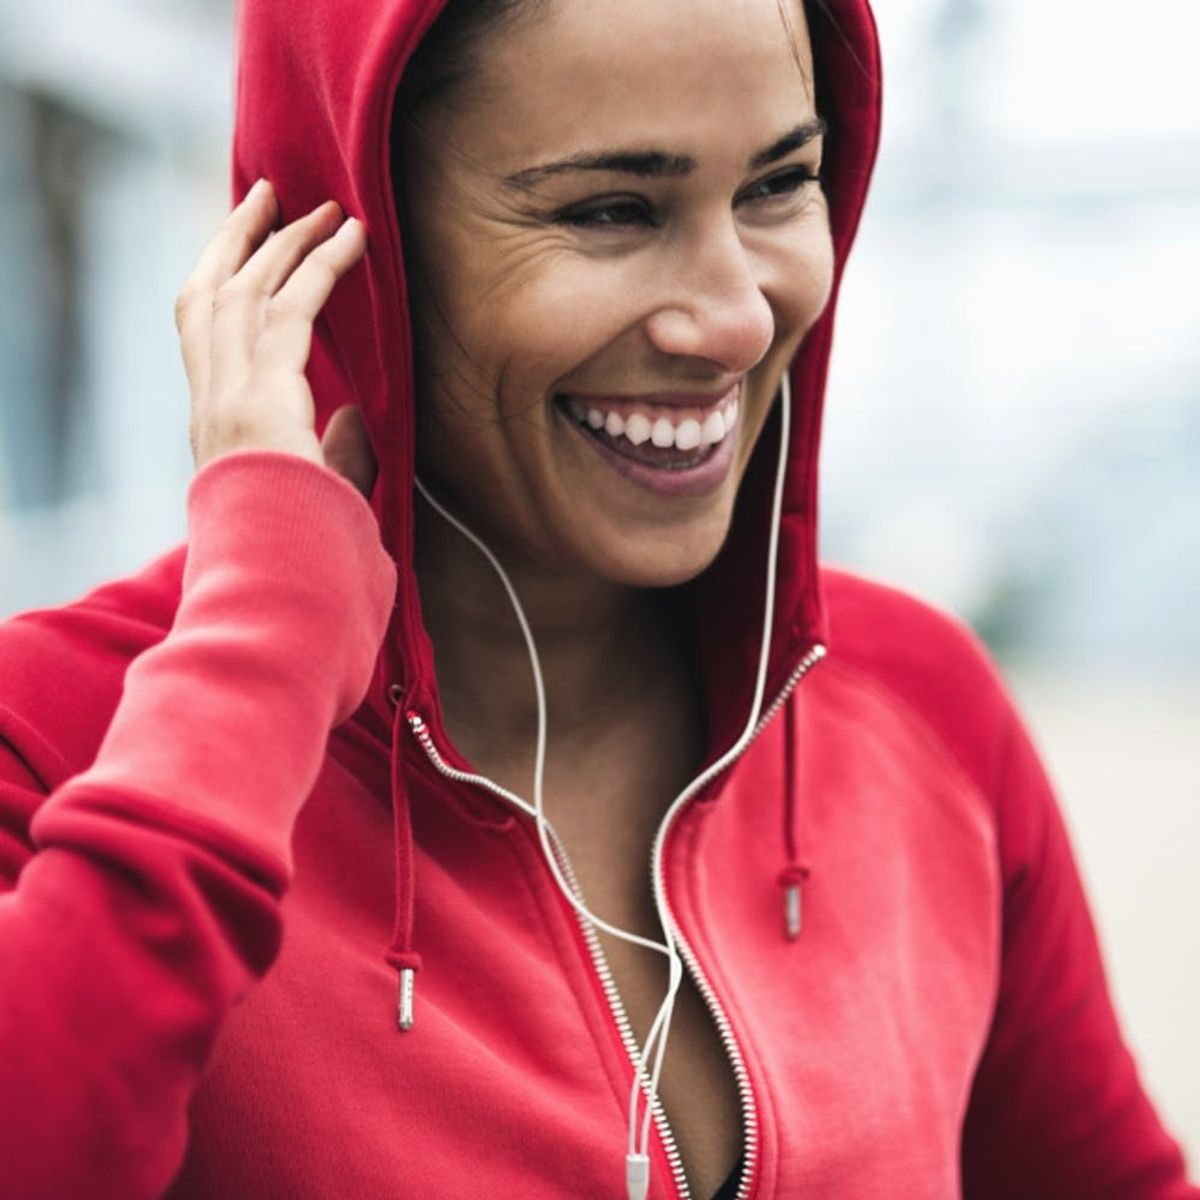 A Spin Instructor Shares How to Make the Ultimate Workout Playlist